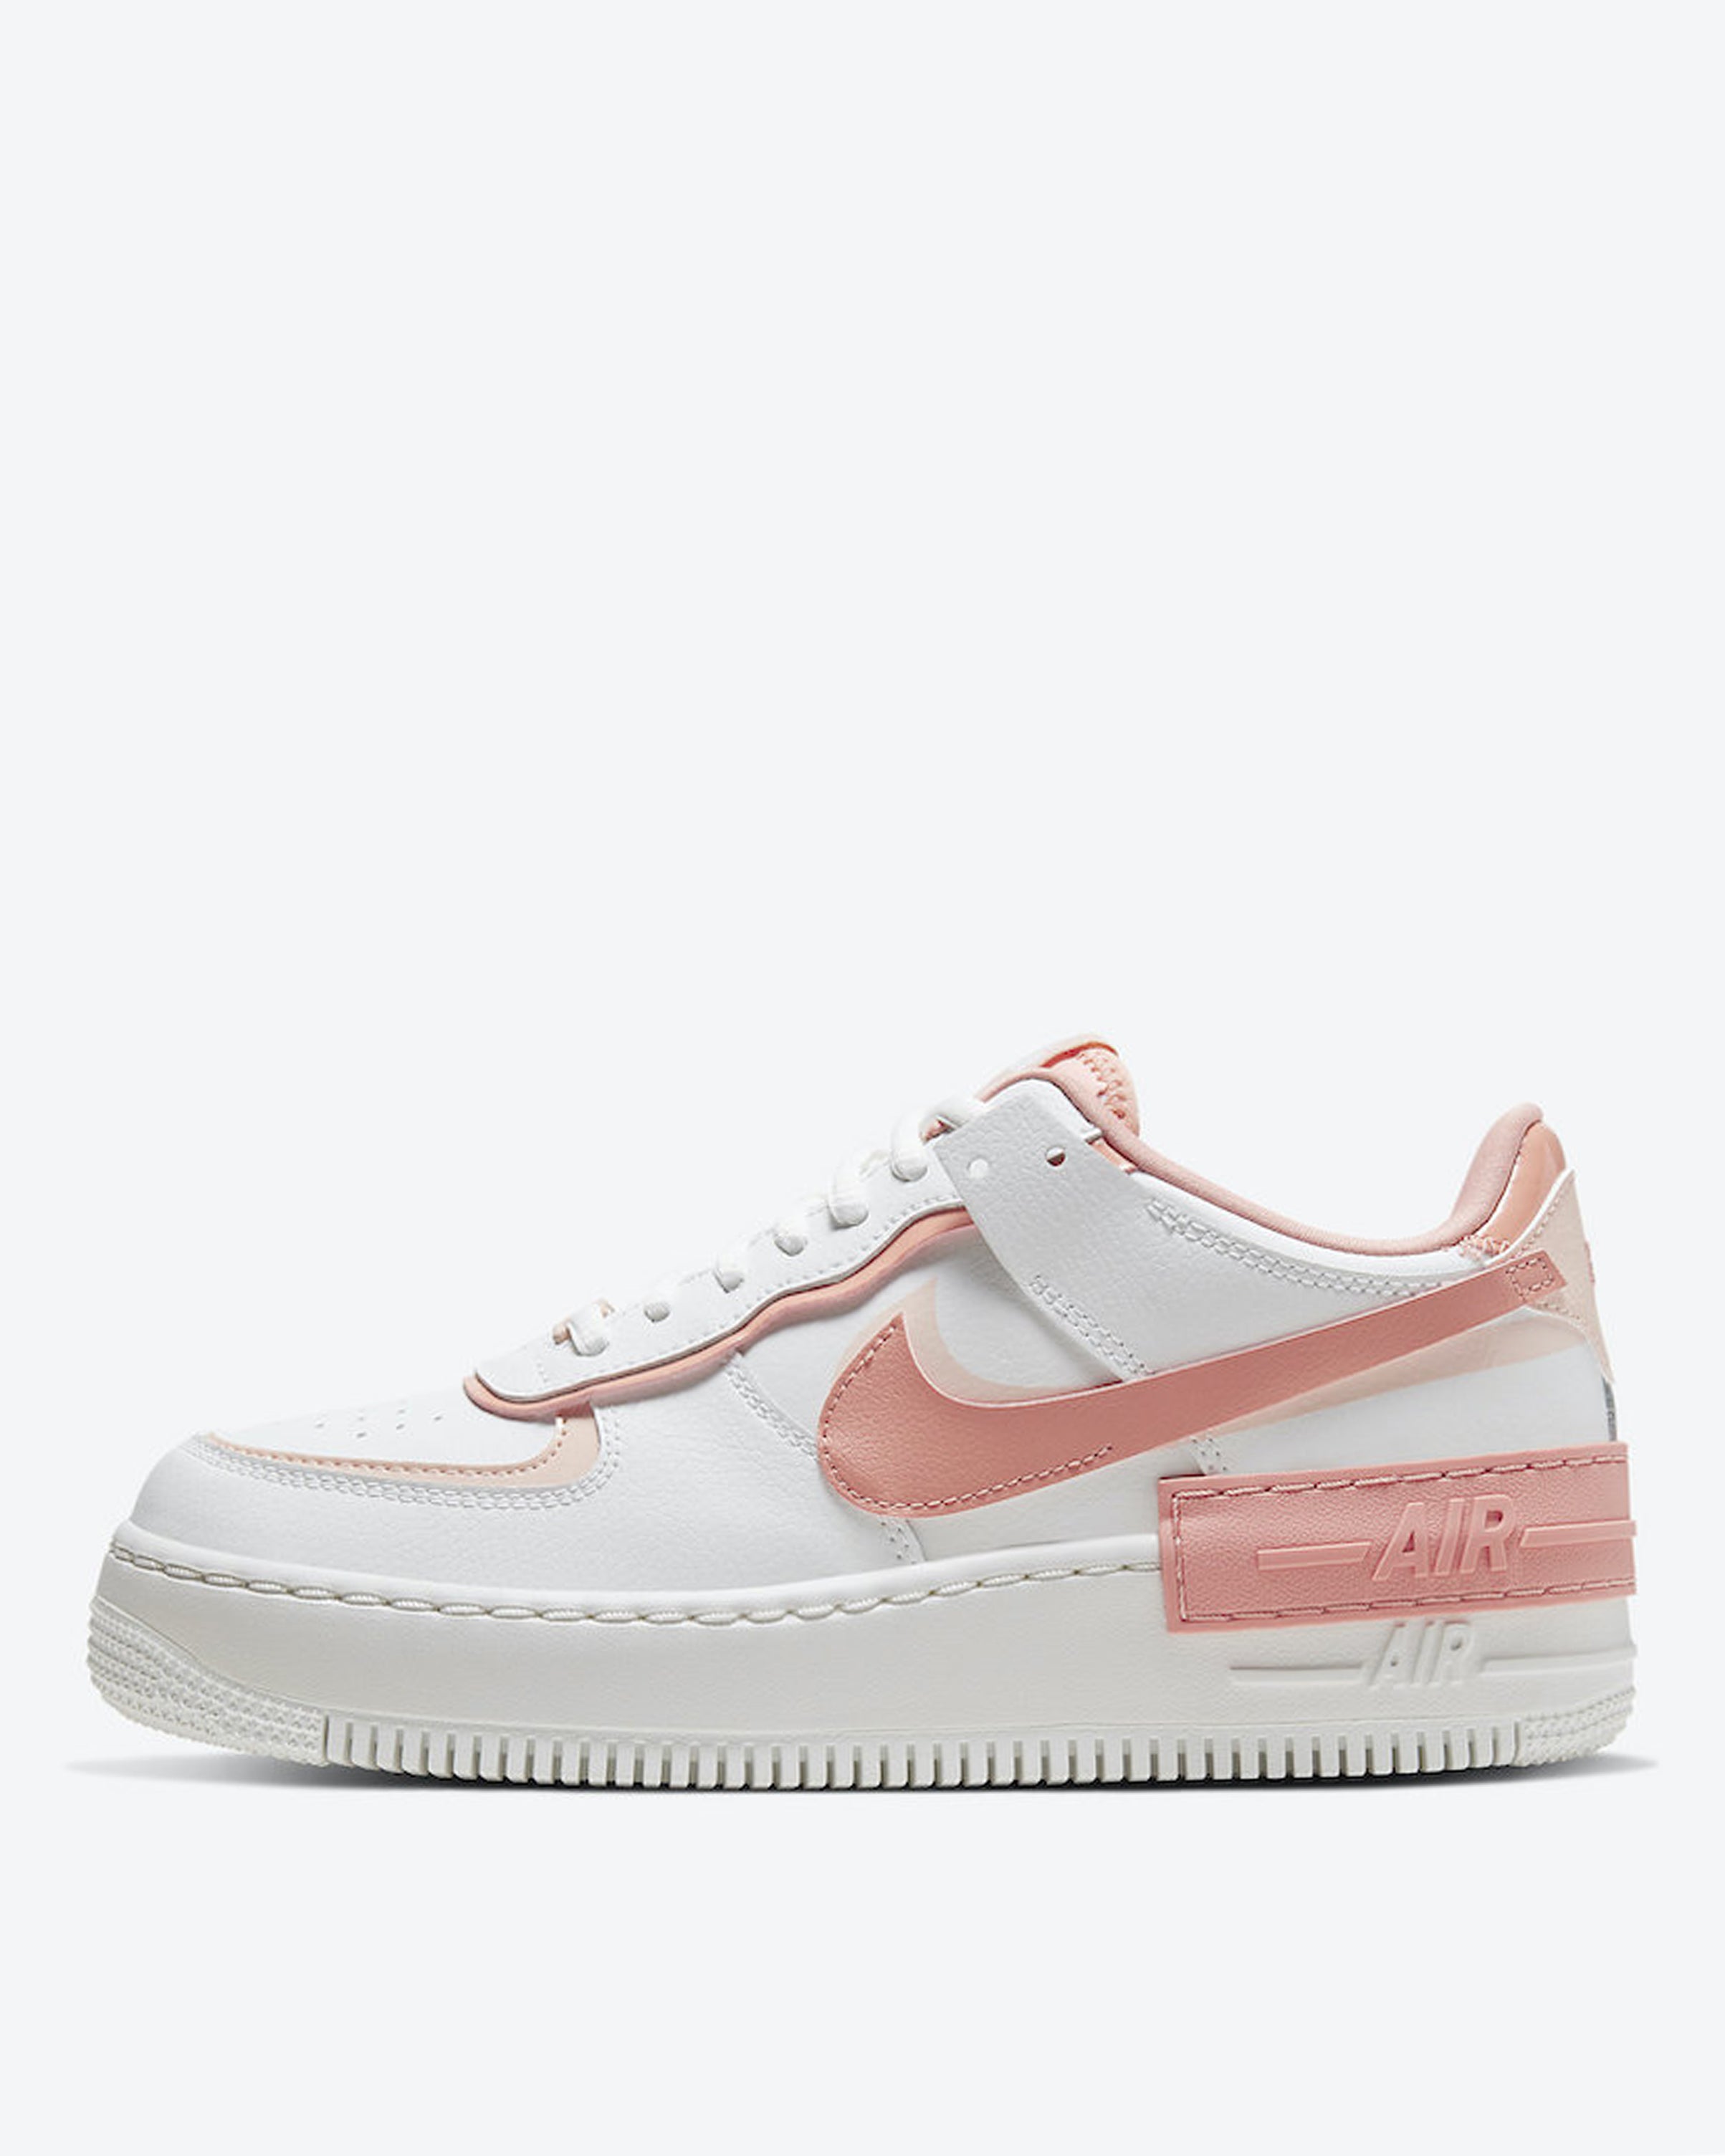 Nike Air Force 1 Shadow in White and Pink